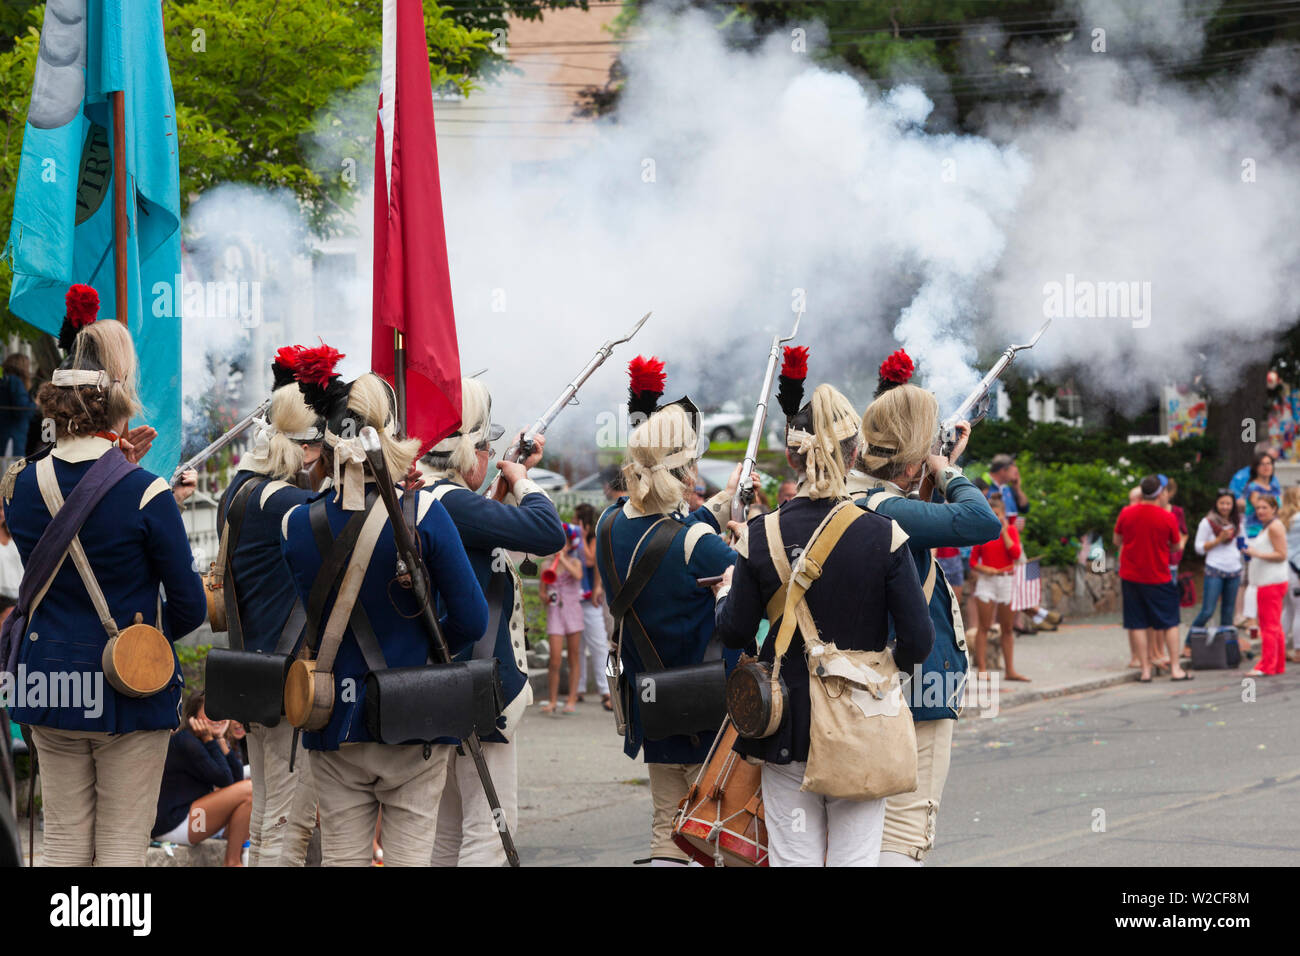 USA, Massachusetts, Cape Ann, Manchester by the Sea, Fourth of July Parade, re-enactors in uniforms of the America Revolution firing muskets Stock Photo